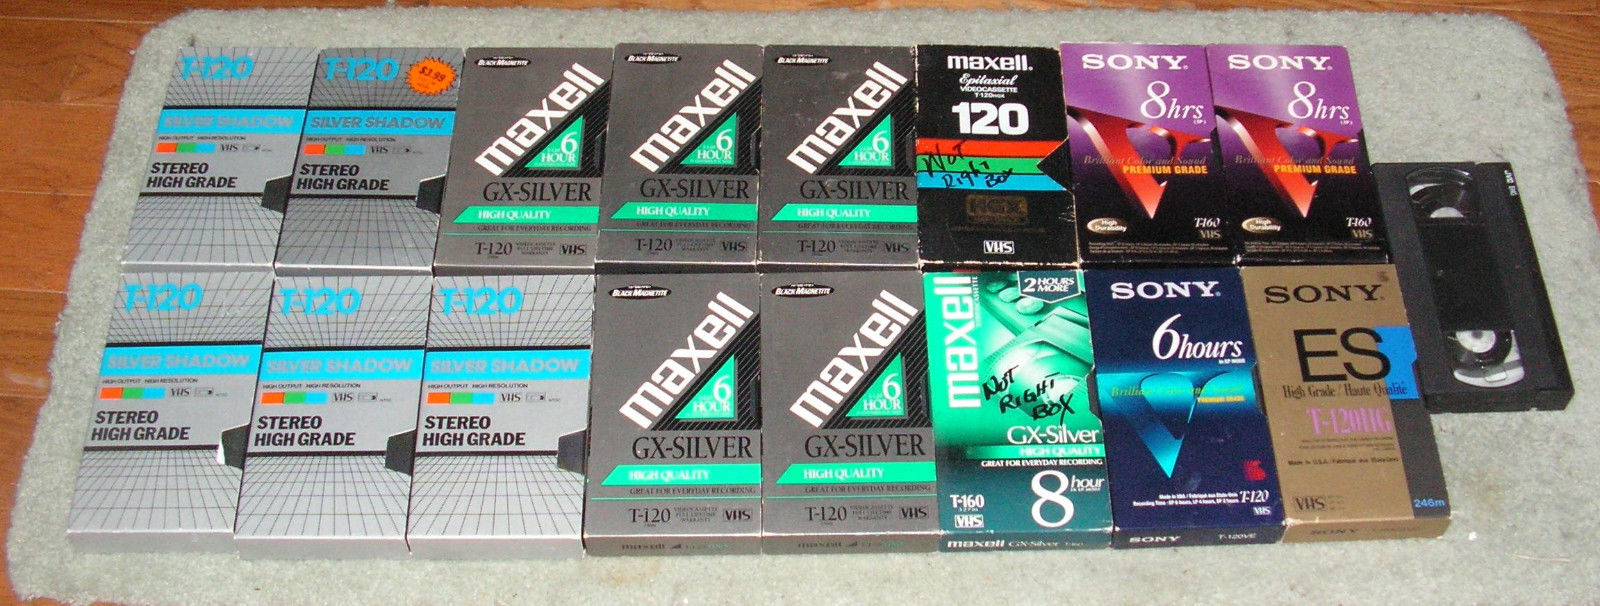 Lot of 17 Mixed Used VHS Tapes Being Sold as Blanks